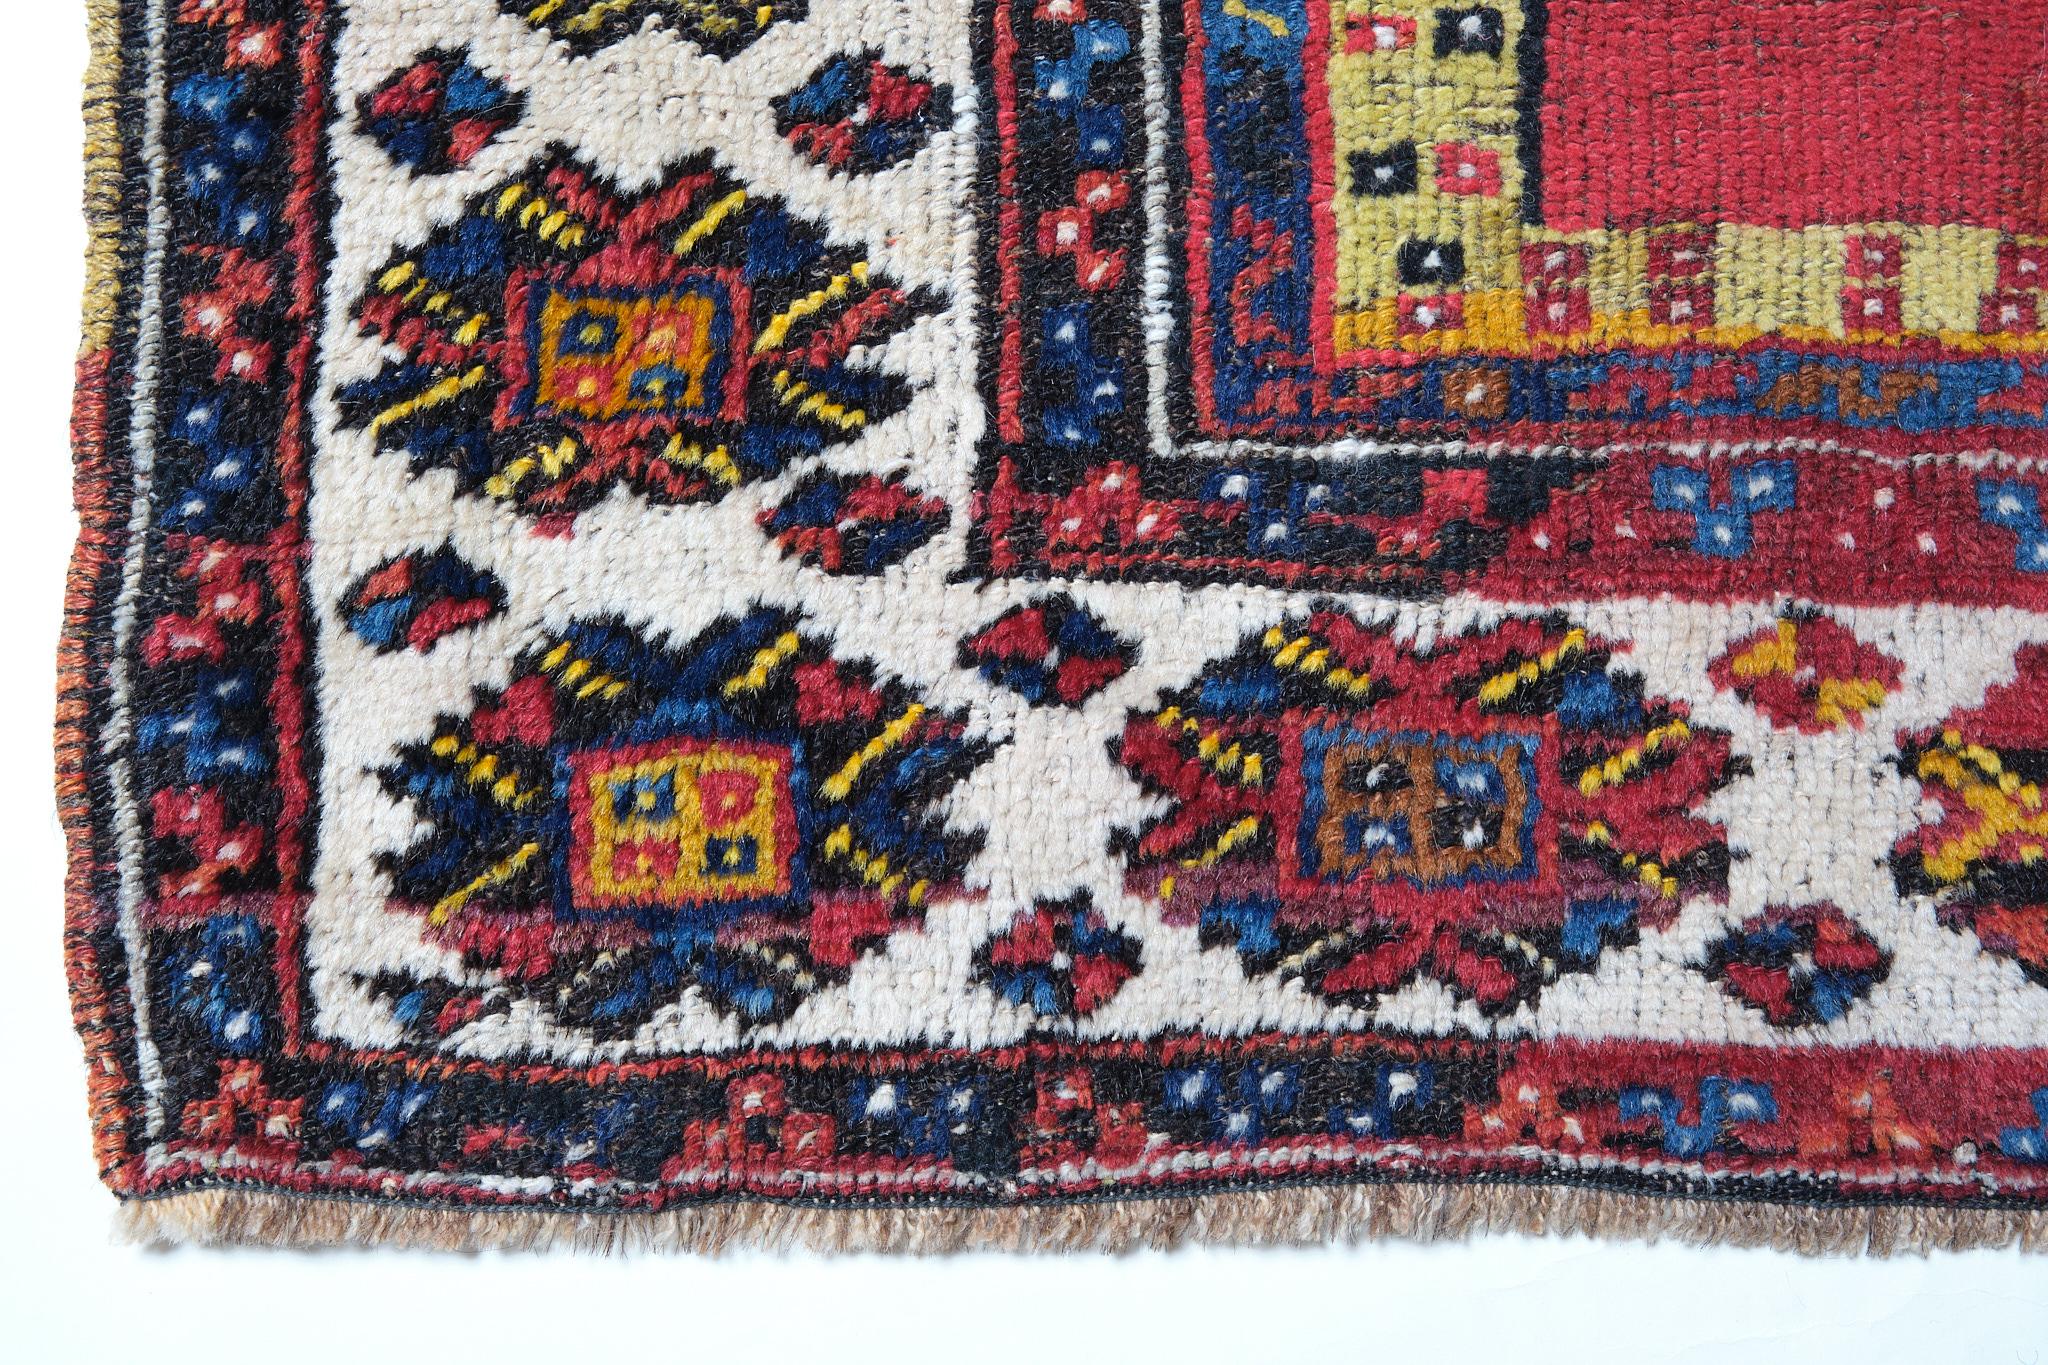 This is an antique prayer ( mihrab ) rug from the South East Anatolia, Antep region with a rare and beautiful color composition.

This town lies in south-eastern Turkey, close to the Syrian border and the Euphrates River. Previously called Aintab